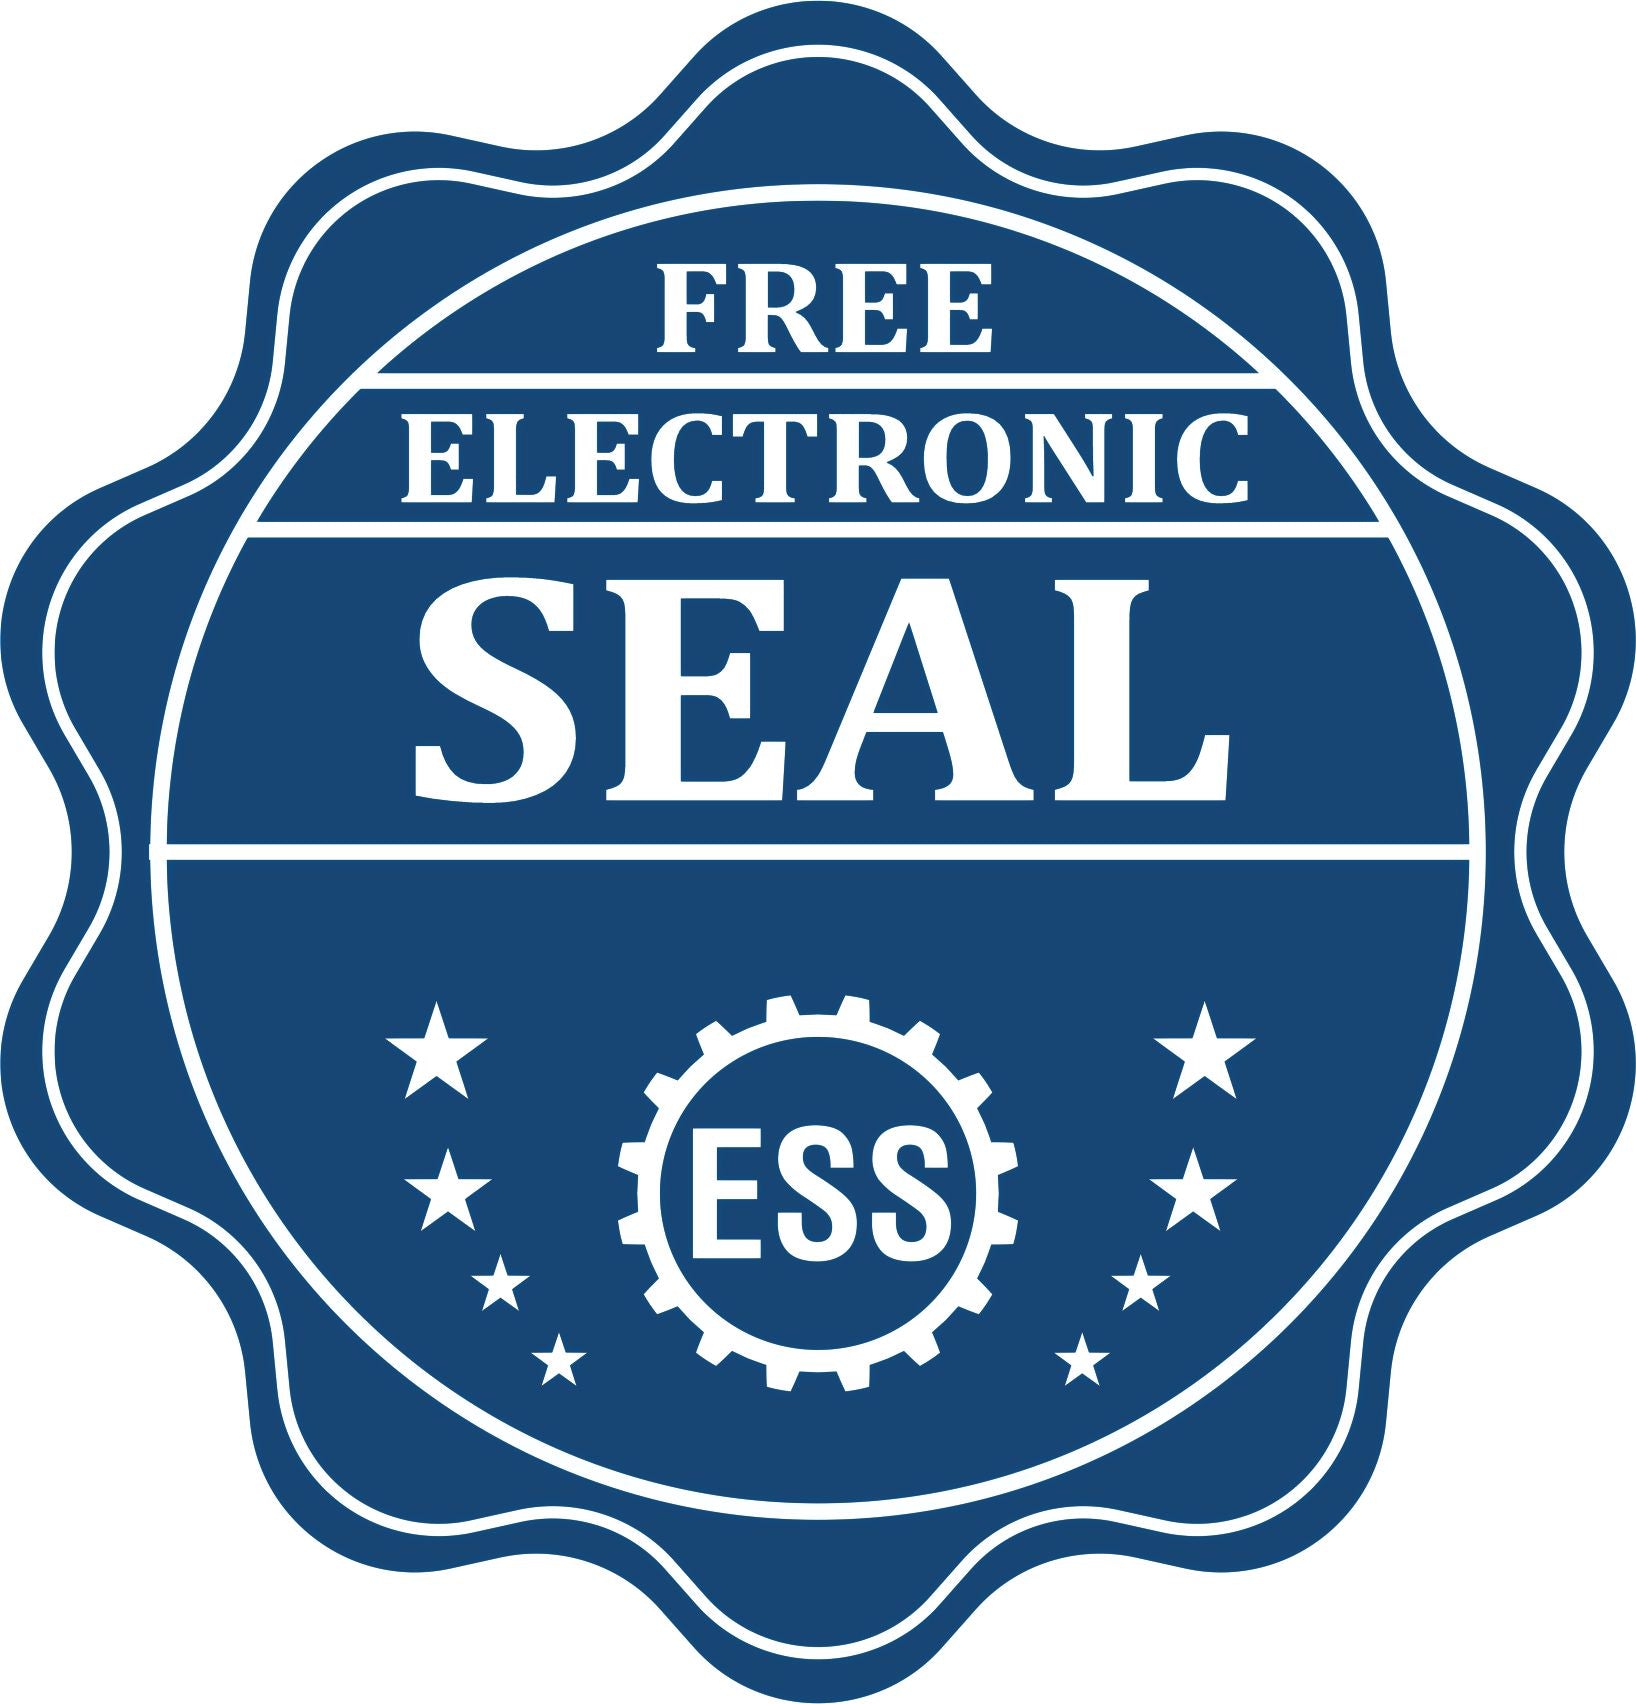 A badge showing a free electronic seal for the Virginia Desk Architect Embossing Seal with stars and the ESS gear on the emblem.